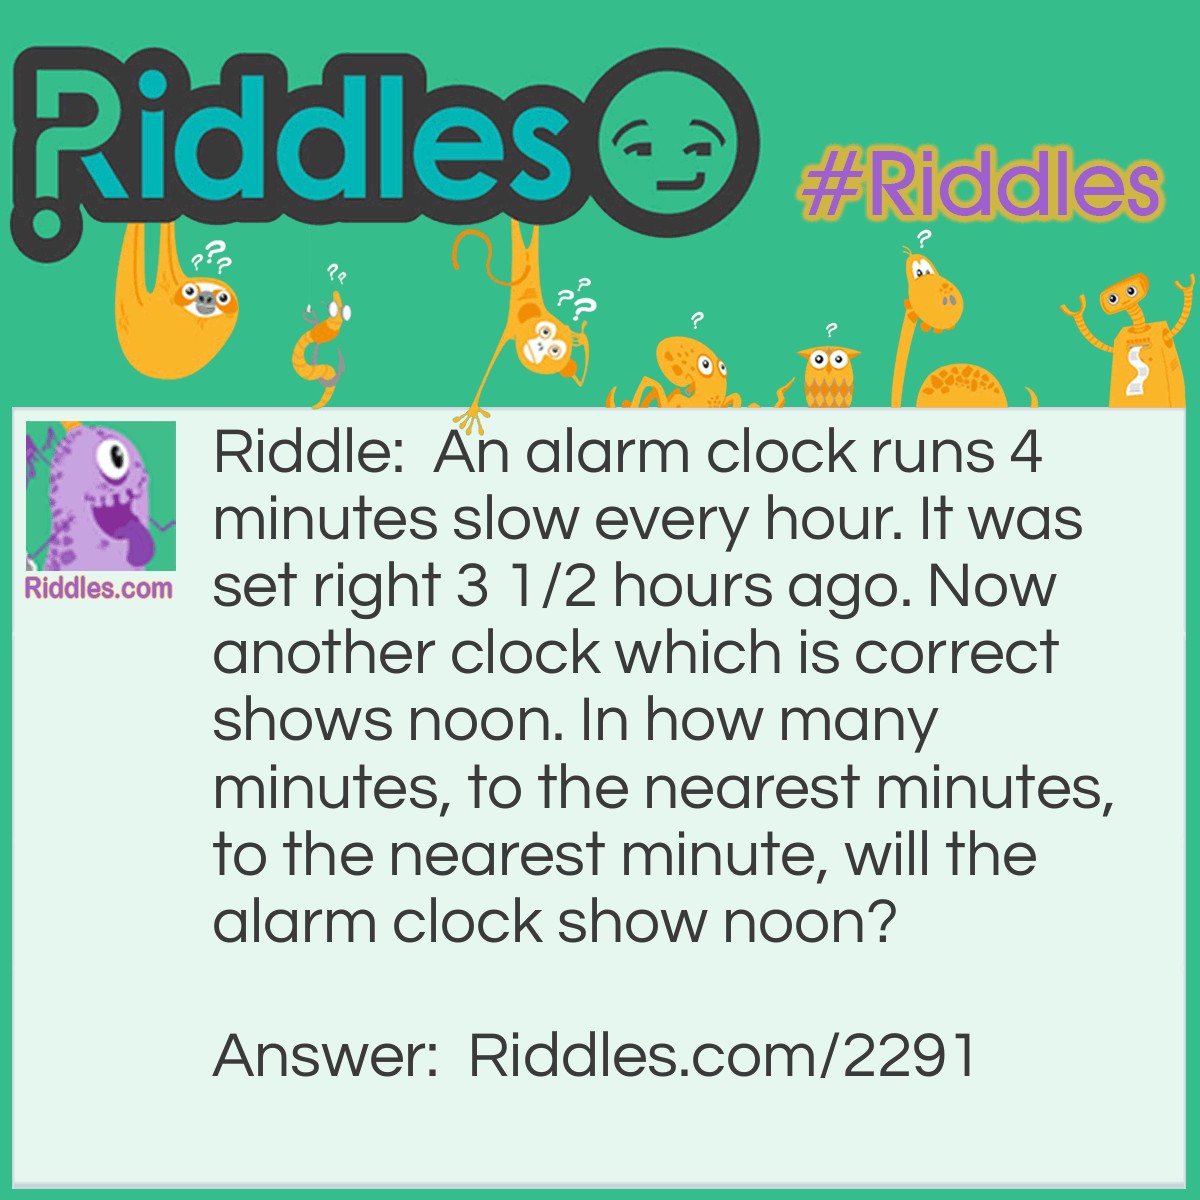 Riddle: An alarm clock runs 4 minutes slow every hour. It was set right 3 1/2 hours ago. Now another clock which is correct shows noon. 
In how many minutes, to the nearest minutes, to the nearest minute, will the alarm clock show noon? Answer: In 3 1/2 hours the alarm clock has become 14 minutes slow. At noon the alarm clock will fall behind approximently an additional minute. Its hands will show noon in 15 minutes.
 